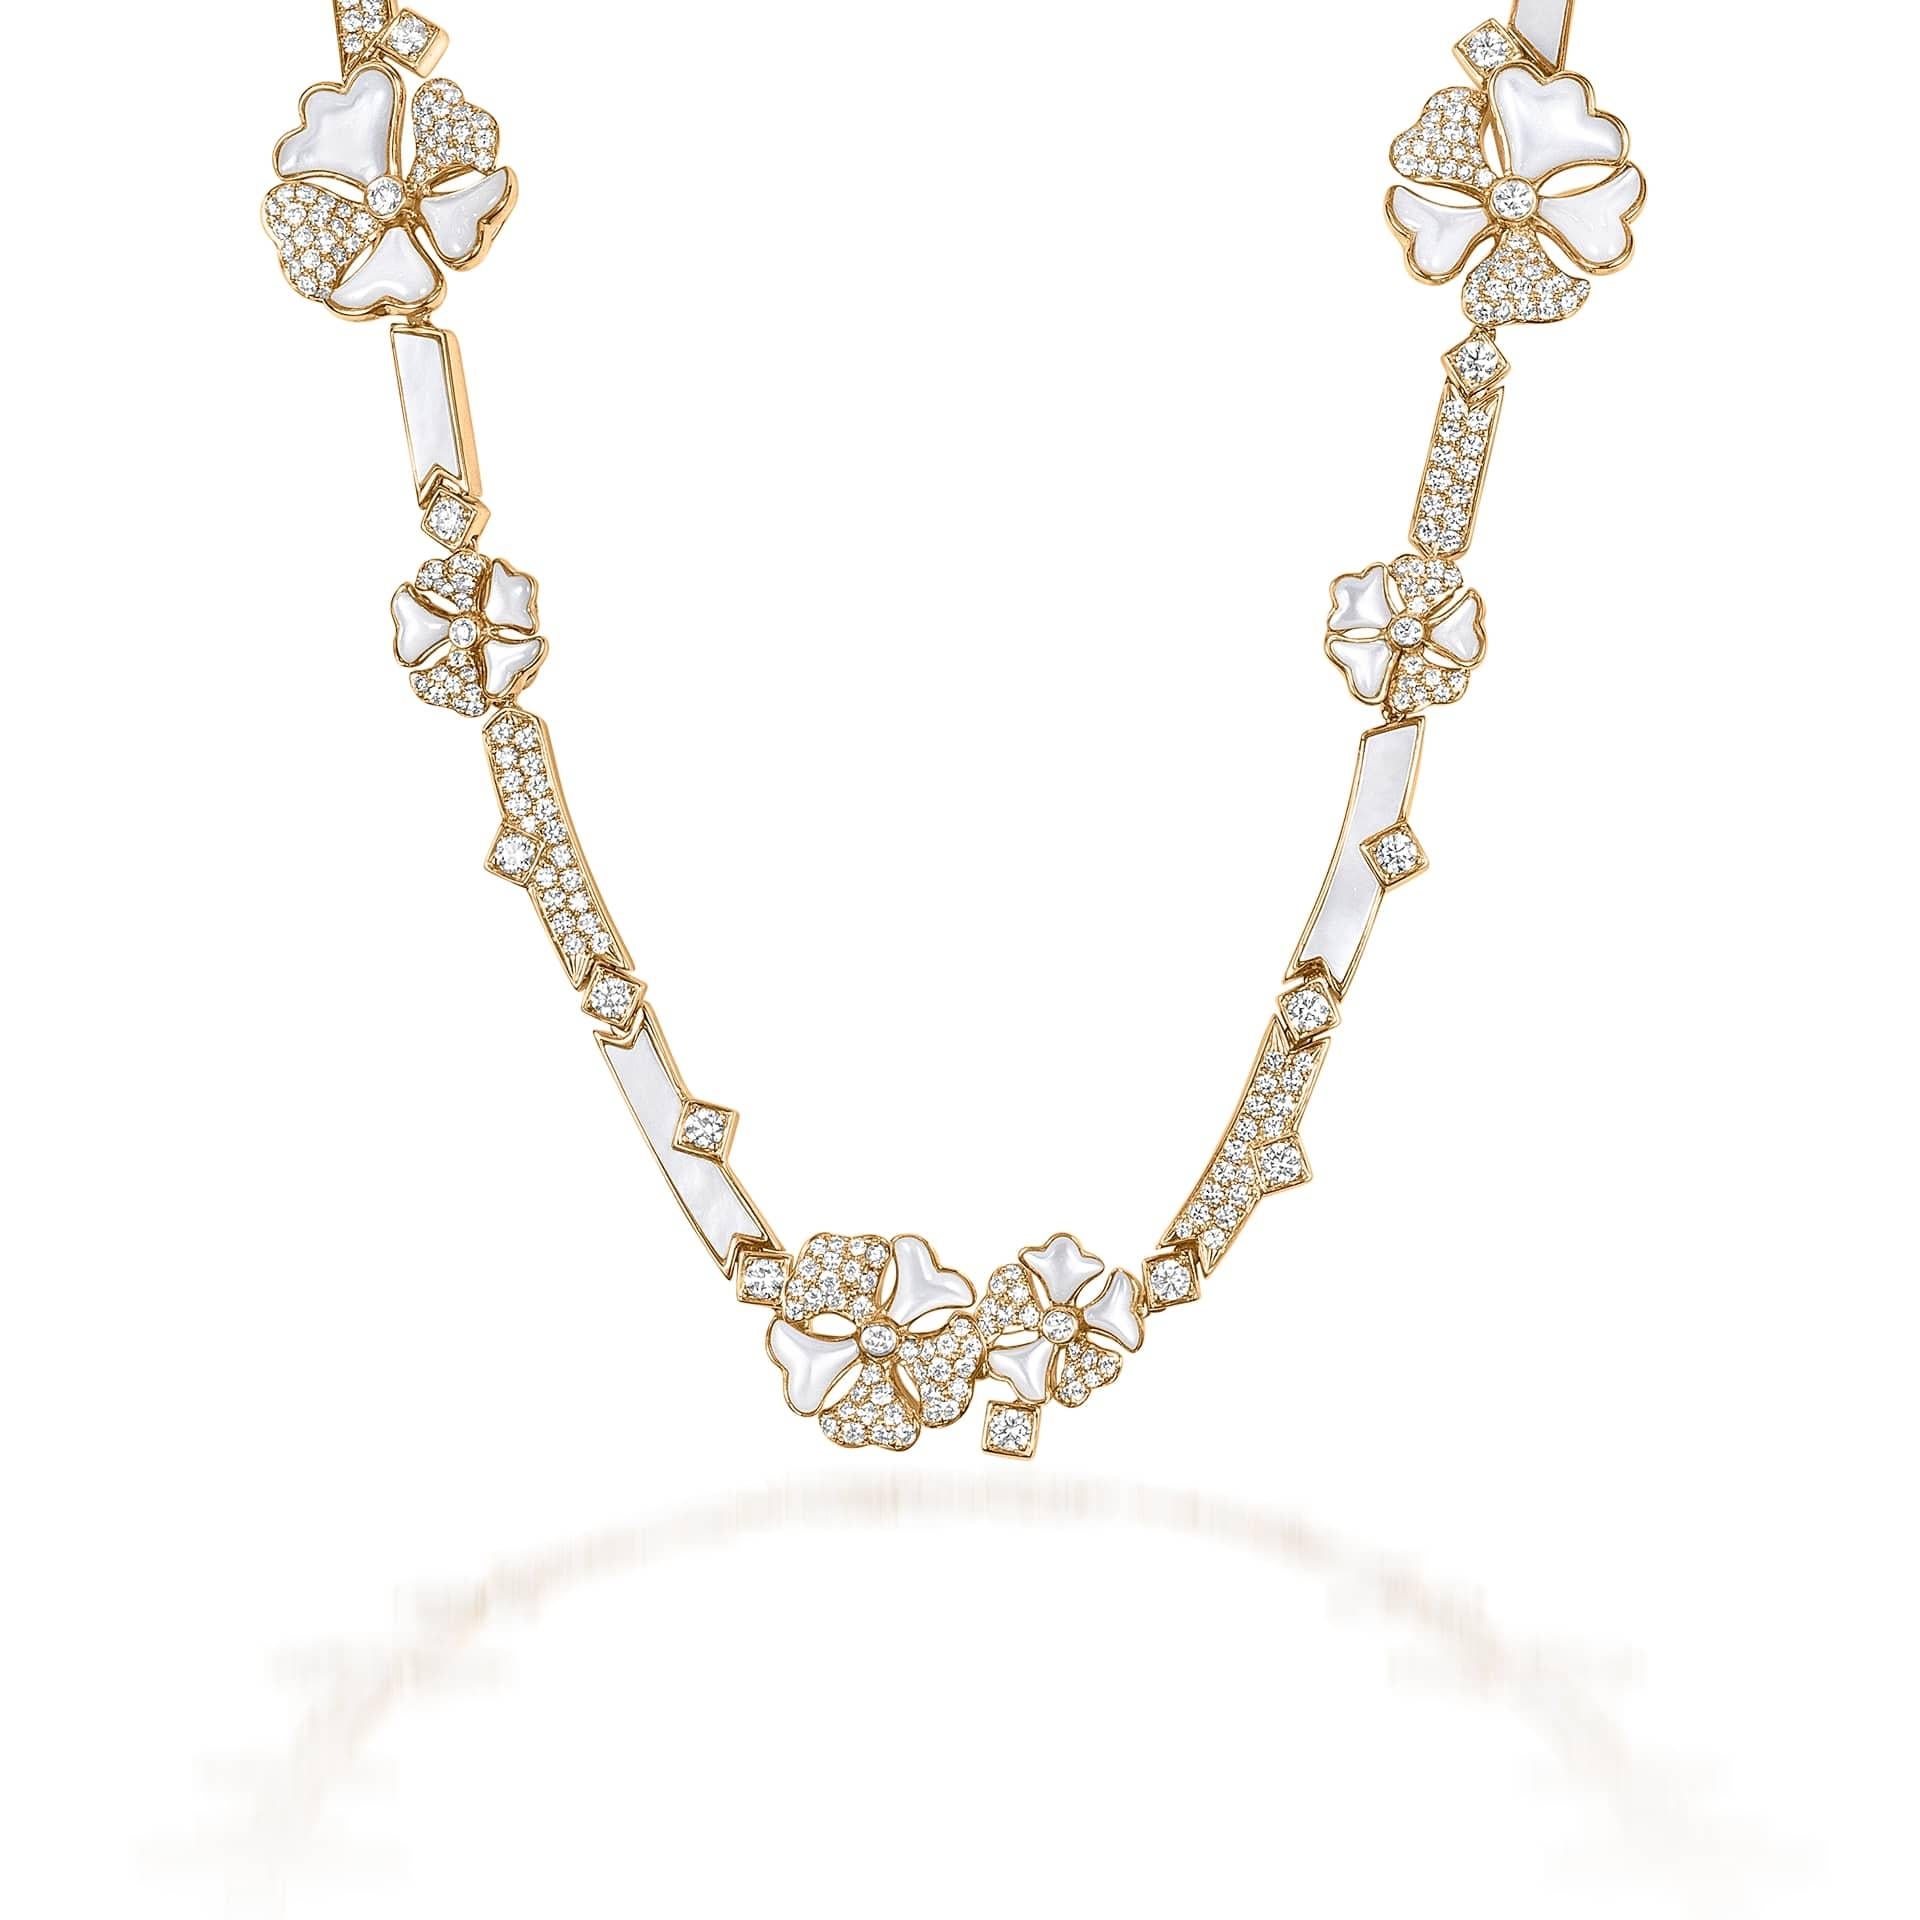 Bloom Diamond and Mother-of-Pearl Long Flower Chain Necklace in 18K Yellow Gold

Inspired by the exquisite petals of the alpine cinquefoil flower, the Bloom collection combines the richness of diamonds and precious metals with the light versatility